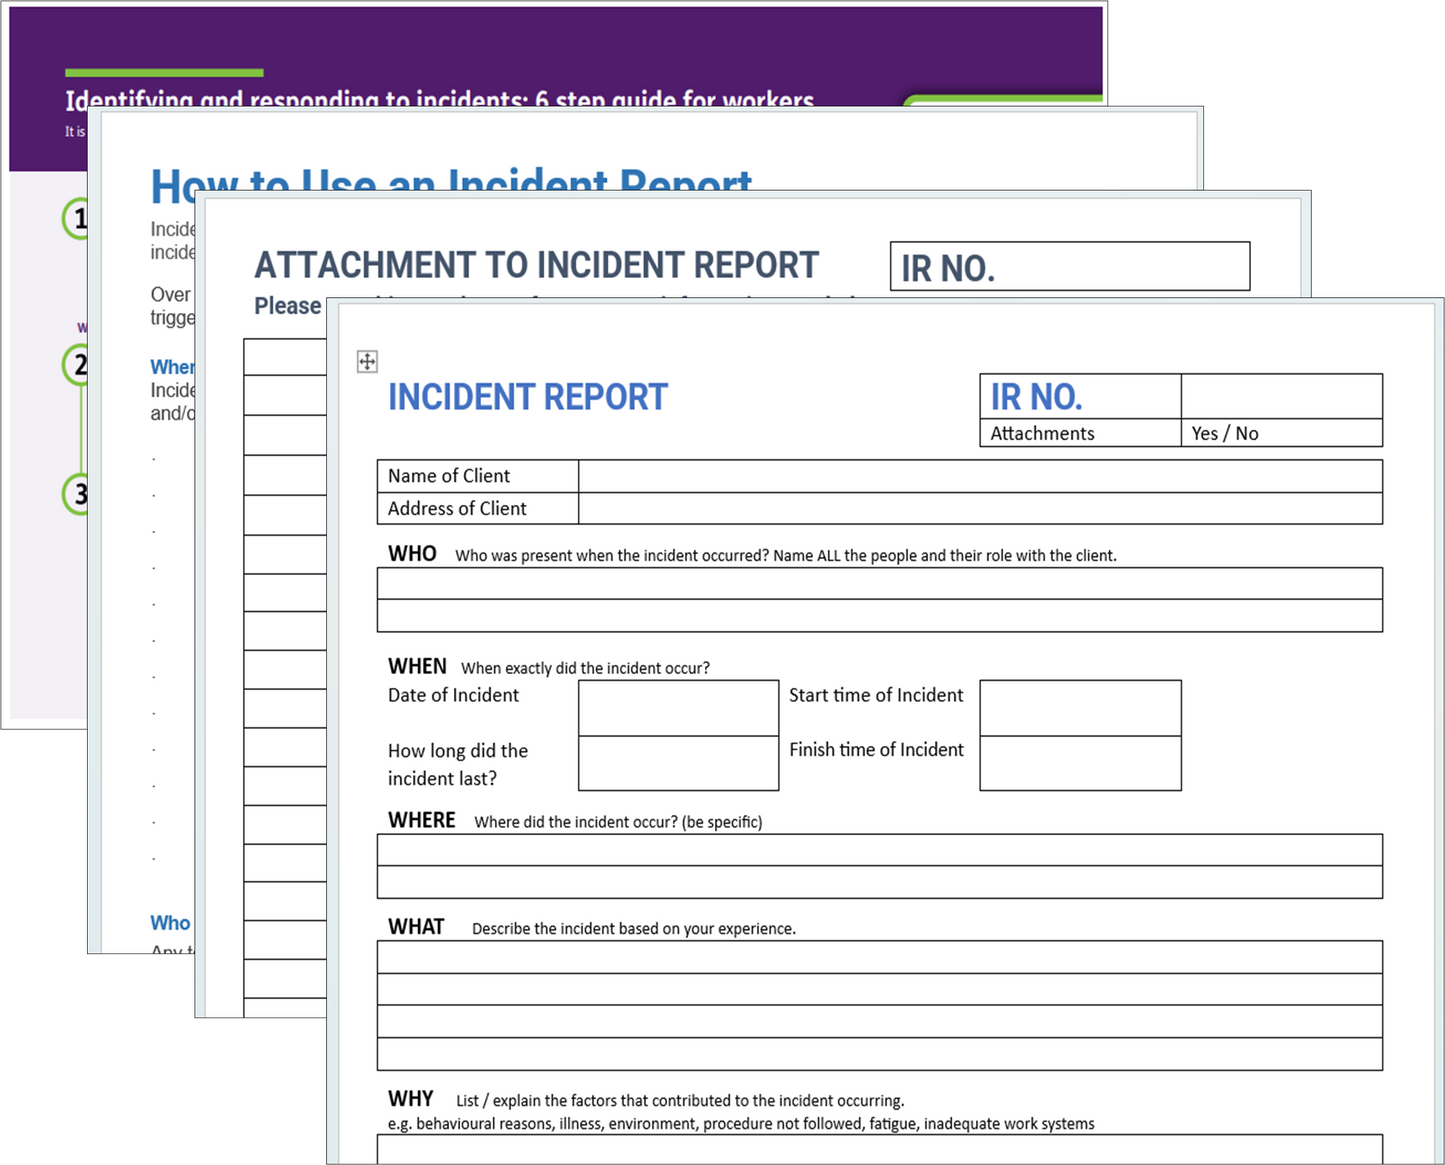 Incident Report - Disability Support